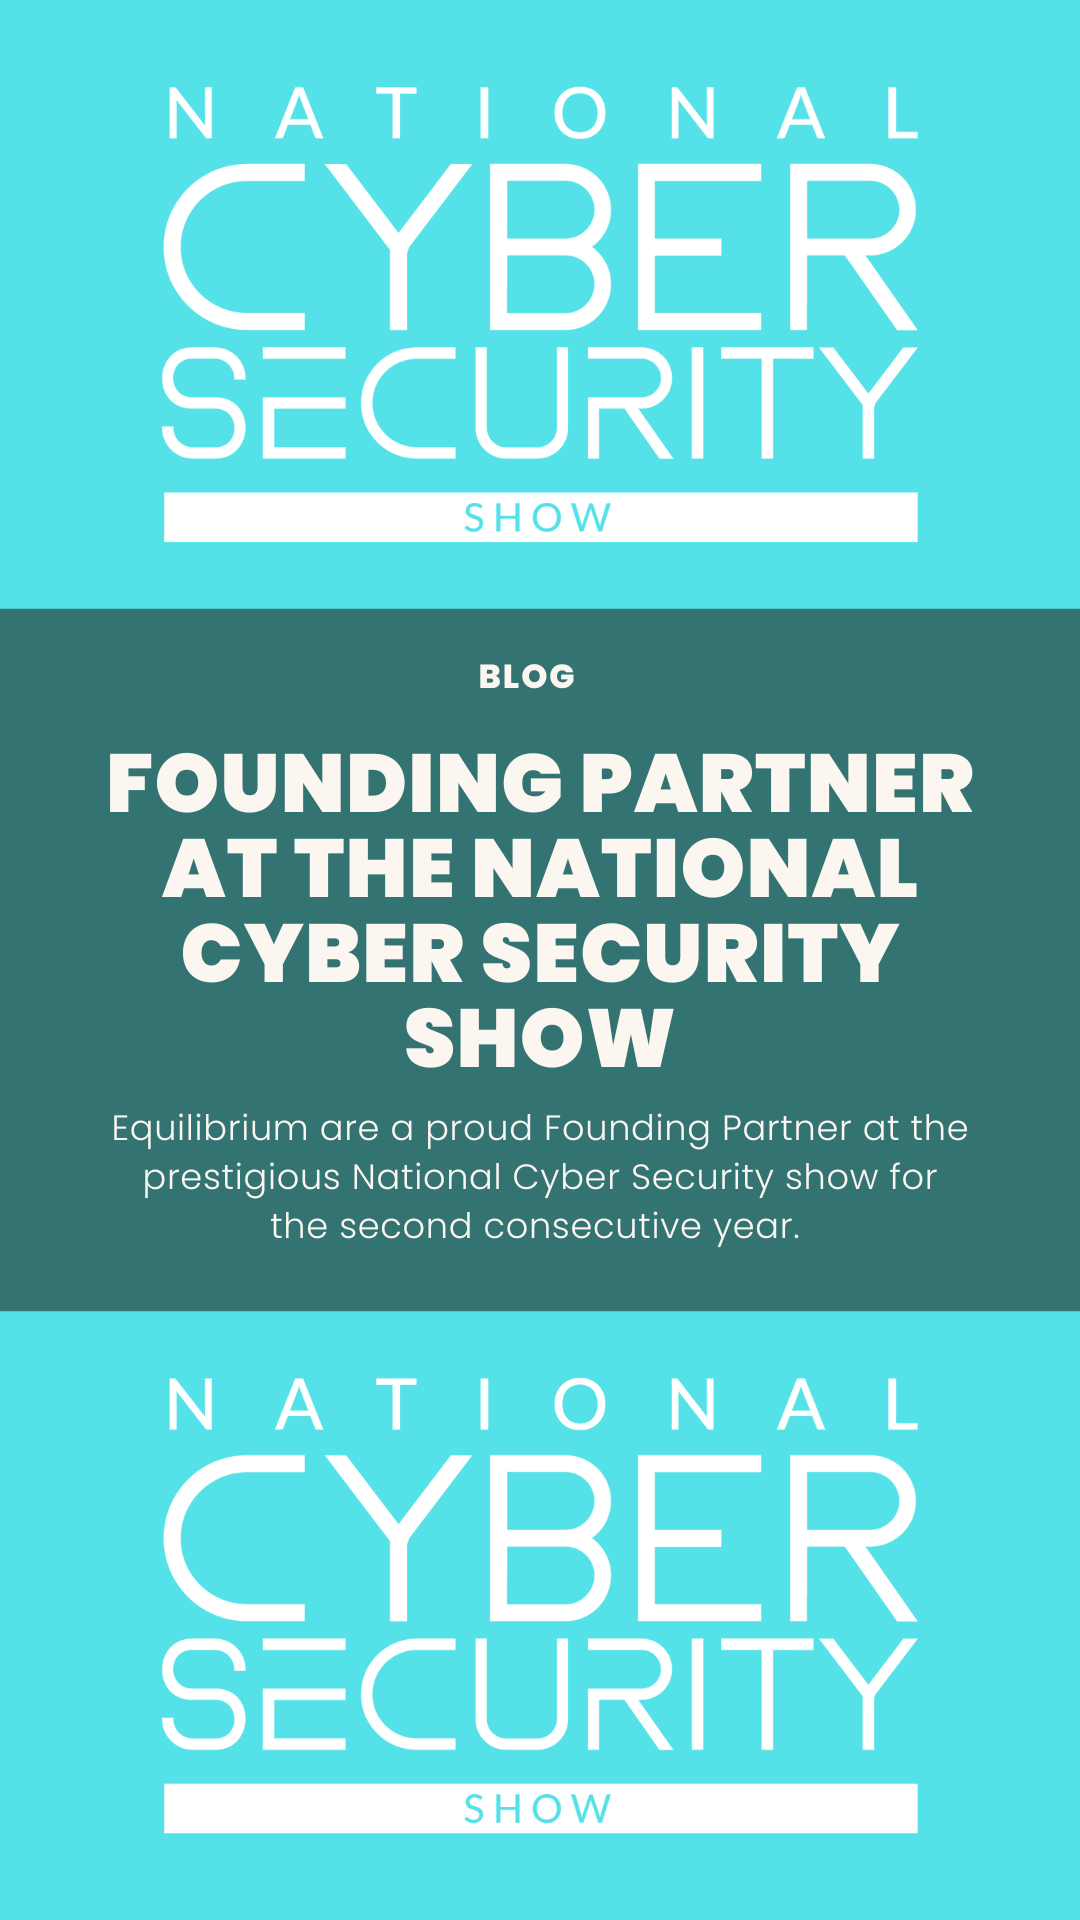 Equilibrium Founding Partner National Cyber Security Show